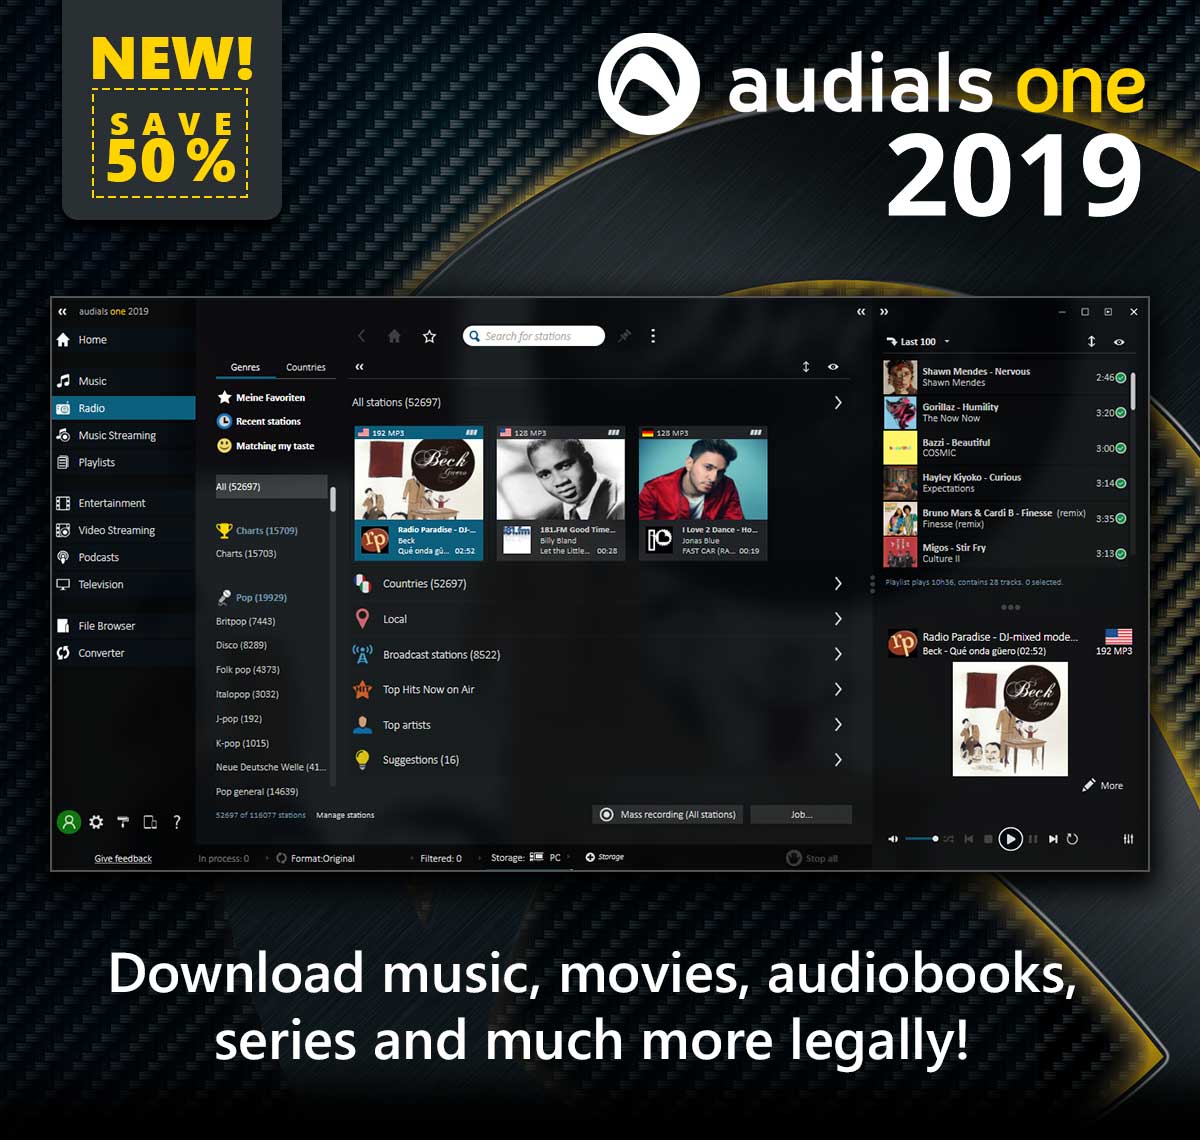 audials one 2019 legal